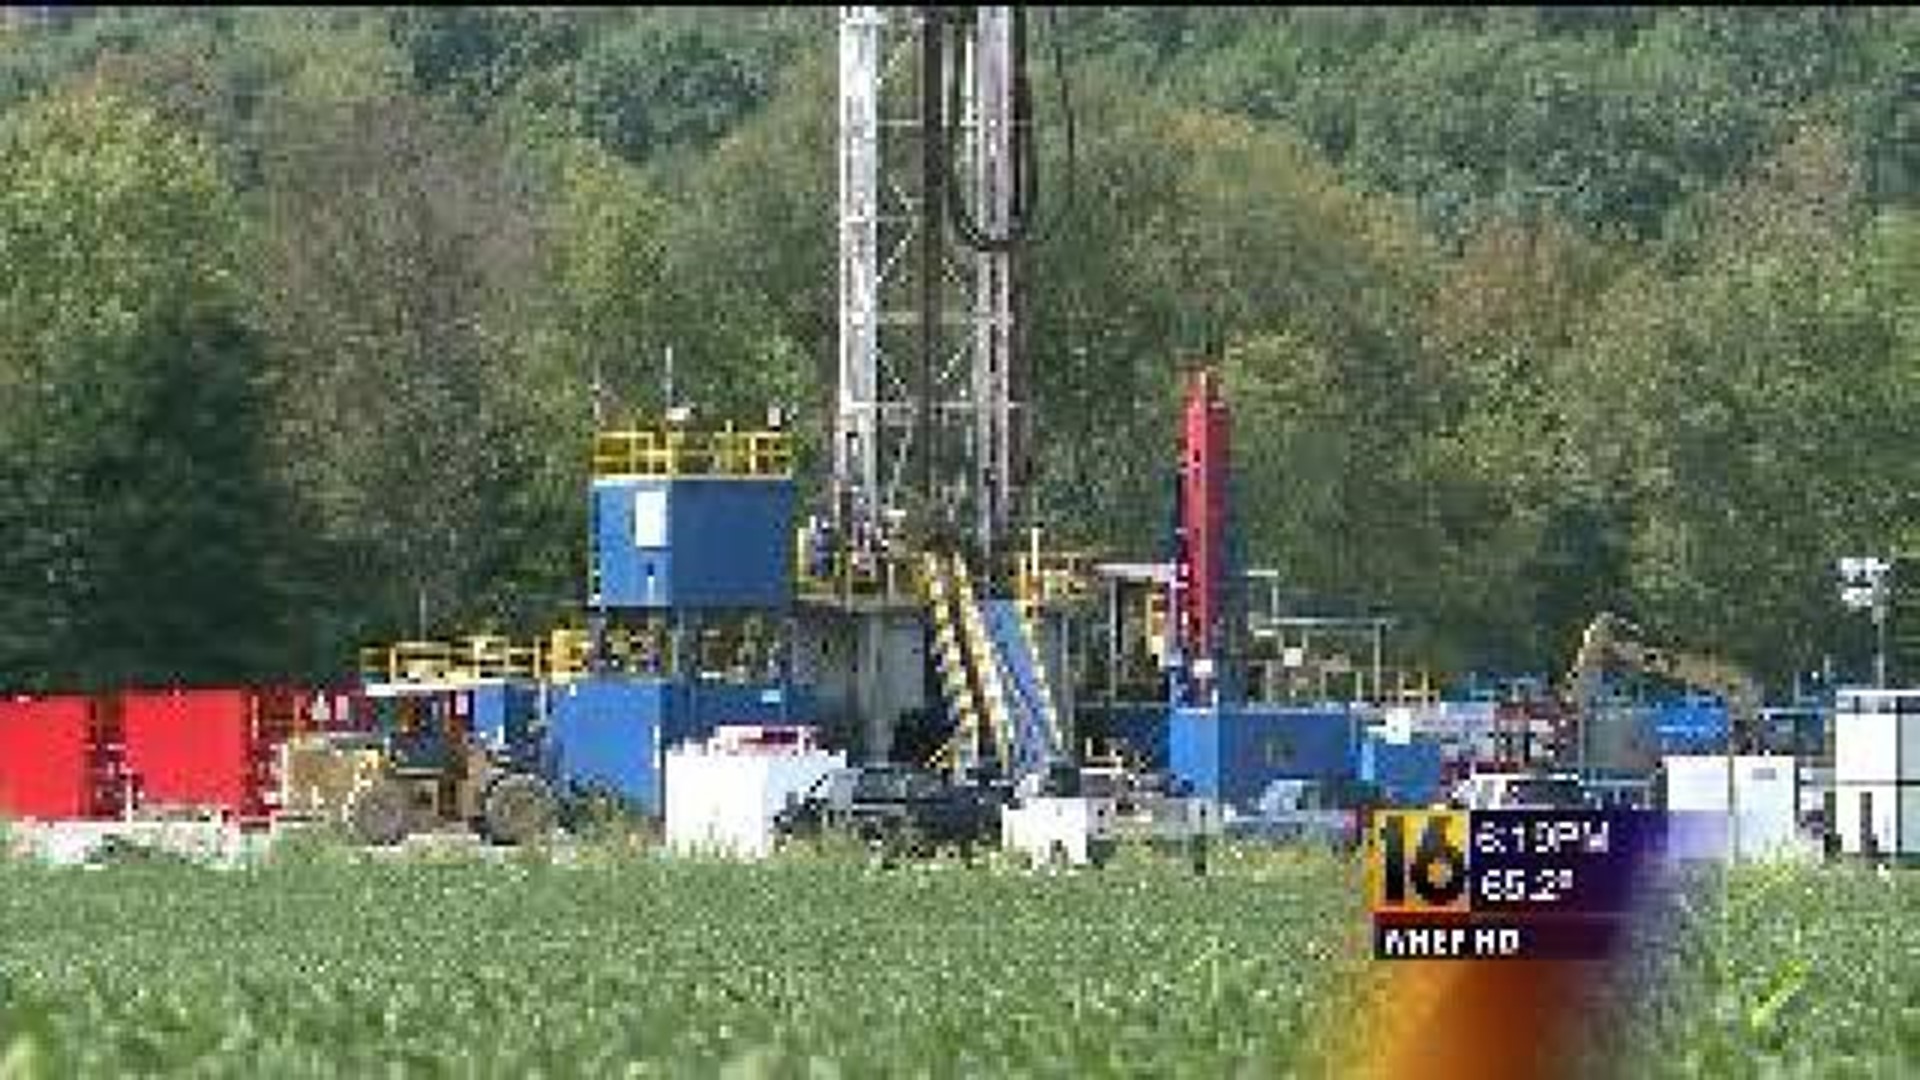 Grant to Fund Gas Training, Education